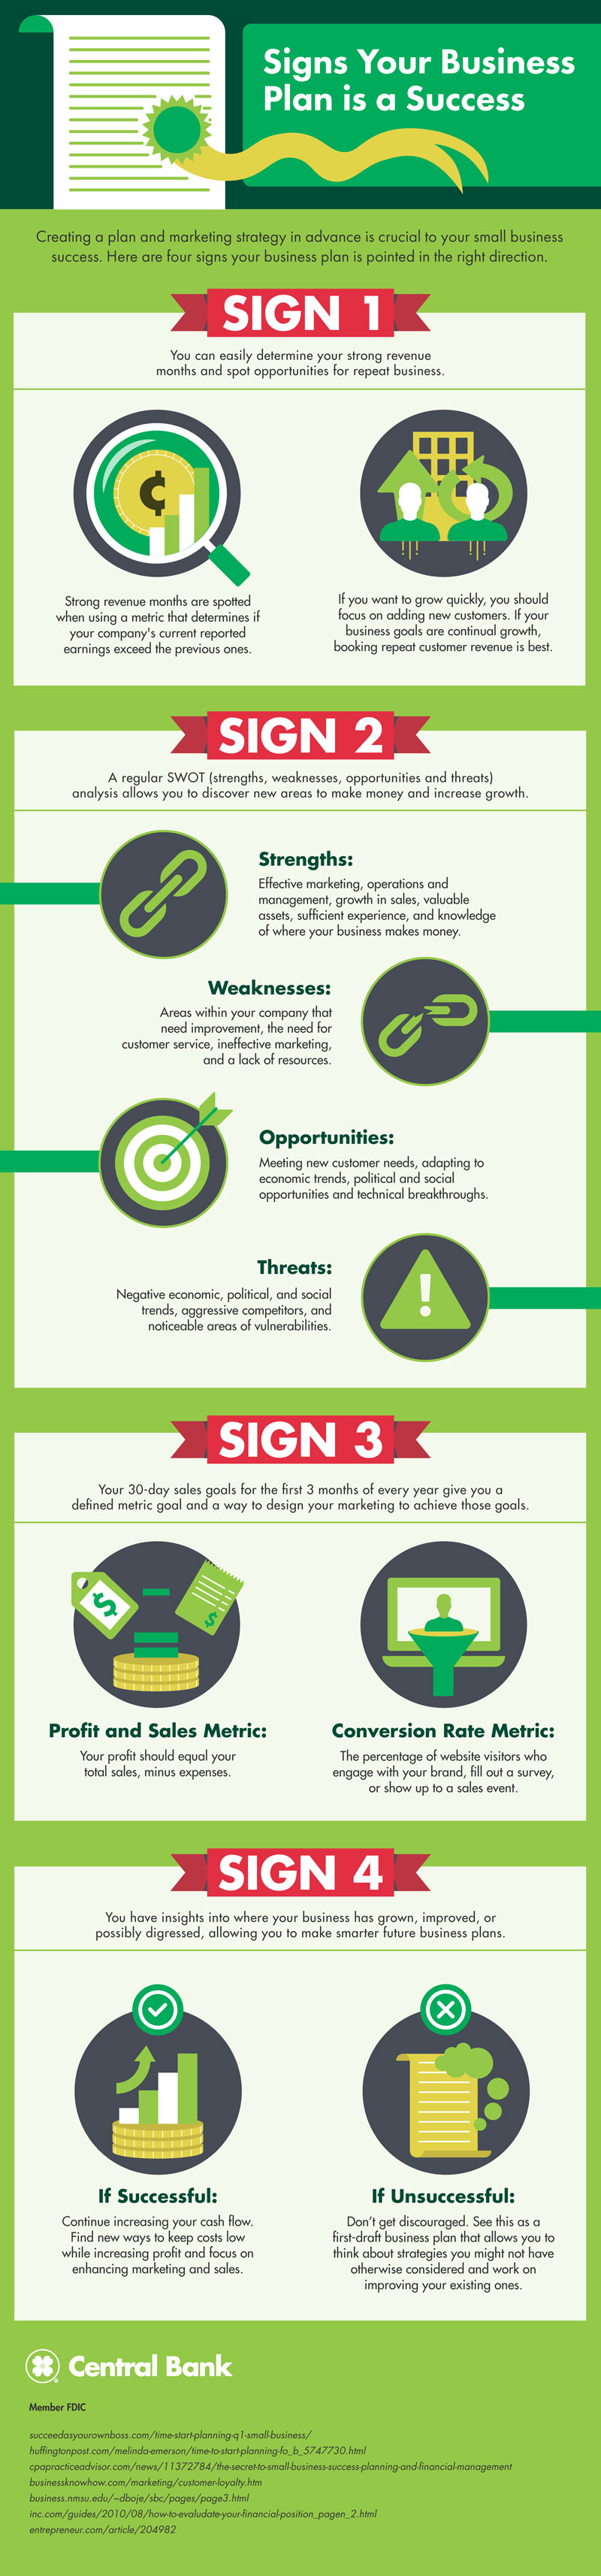 An infographic showing four possible signs that your new business will perform well